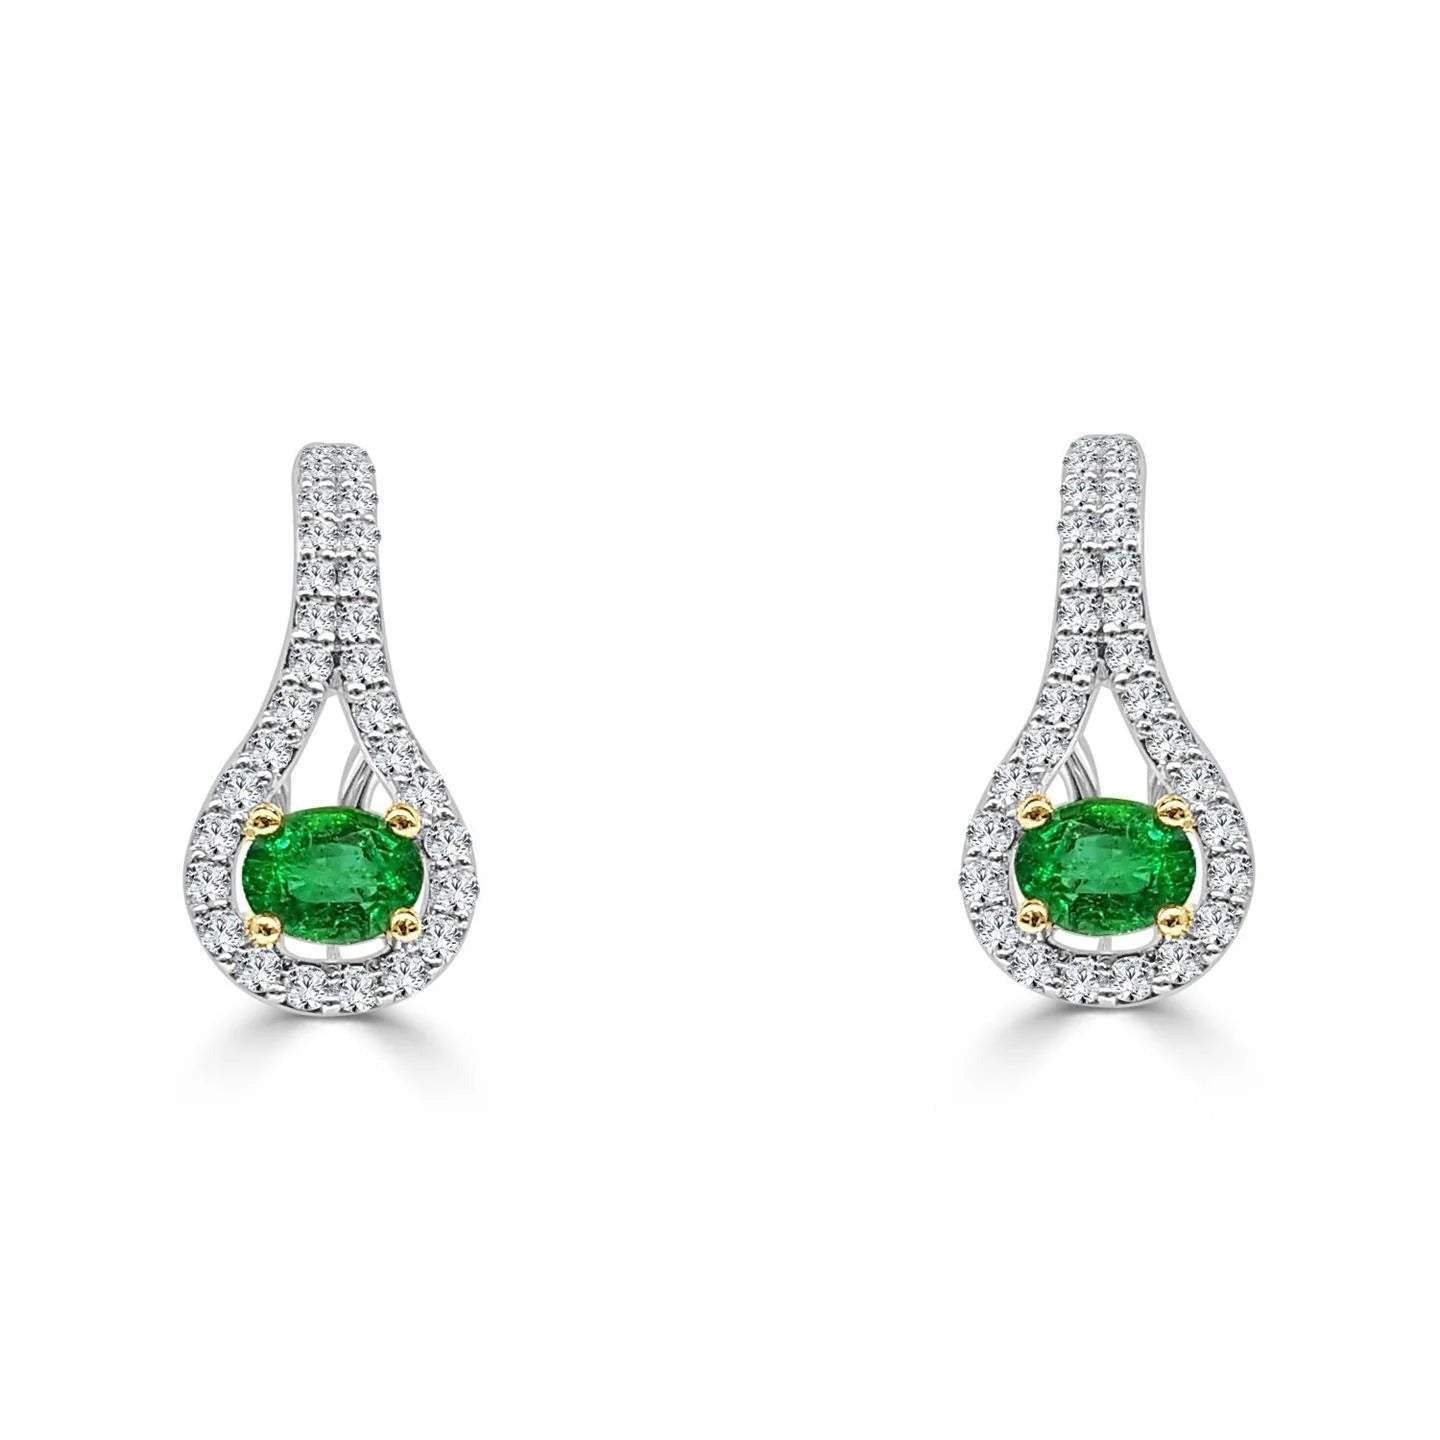 Ladies Drop Earrings 5.90 Carats Green Emerald And Diamonds White Gold 14K